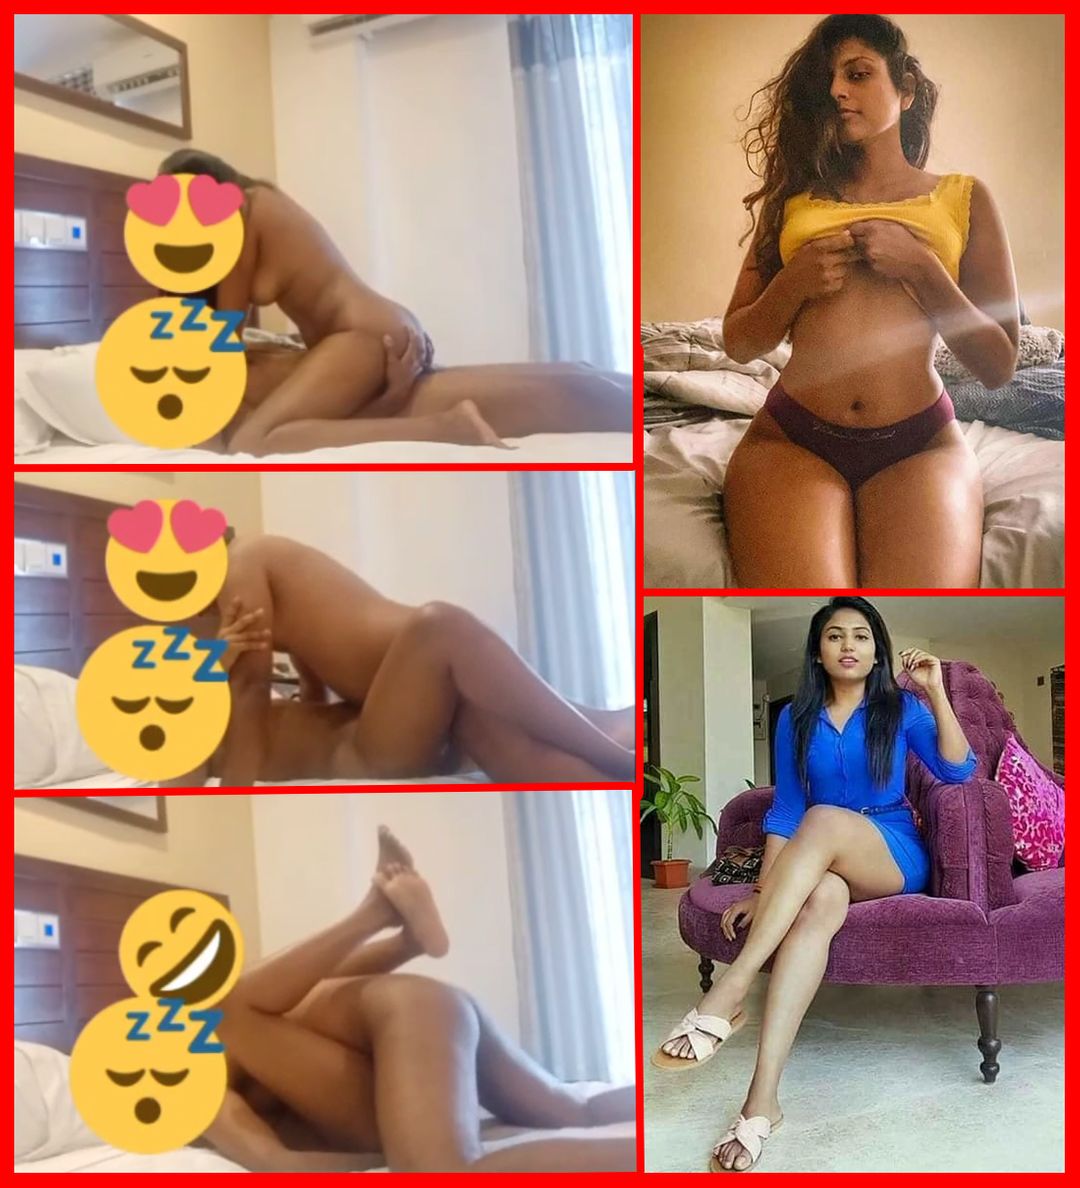 🔥️🔥️ COMPLETE VIDEOS ❤️ Super Hot Desi Office Girl 💋🔥️ Fucked by Ex 💦 at Hotel Room 😍 All Sex Positions with Moaning 🔥💦💦️ CUM in Pussy 😆 L3AK3D UnCut Video Clip ❤️ Link In Comment 👇👇 Scrolller pic